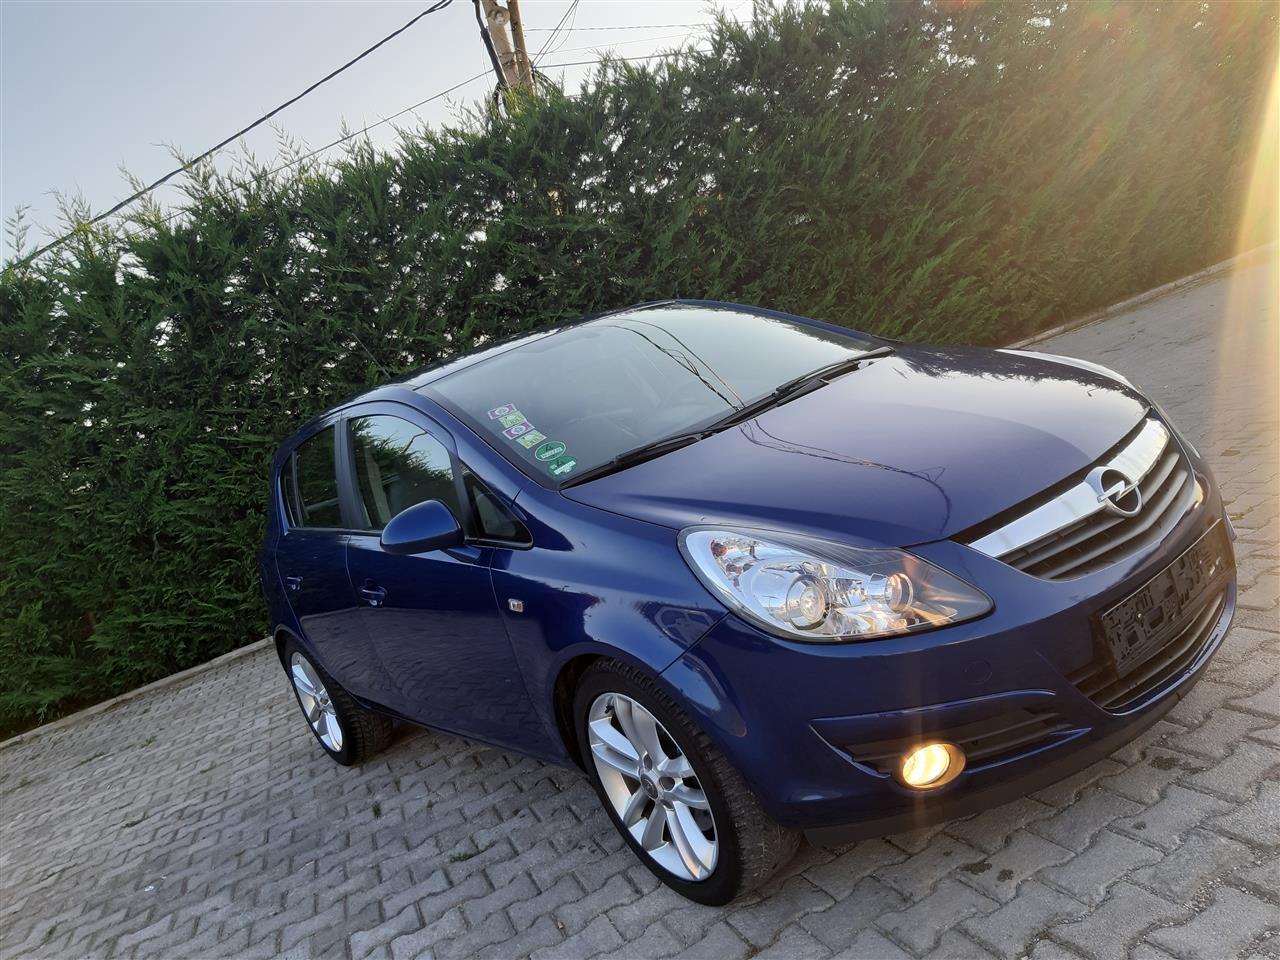 The Opel Corsa Diesel Is Positively Eco-Tastic